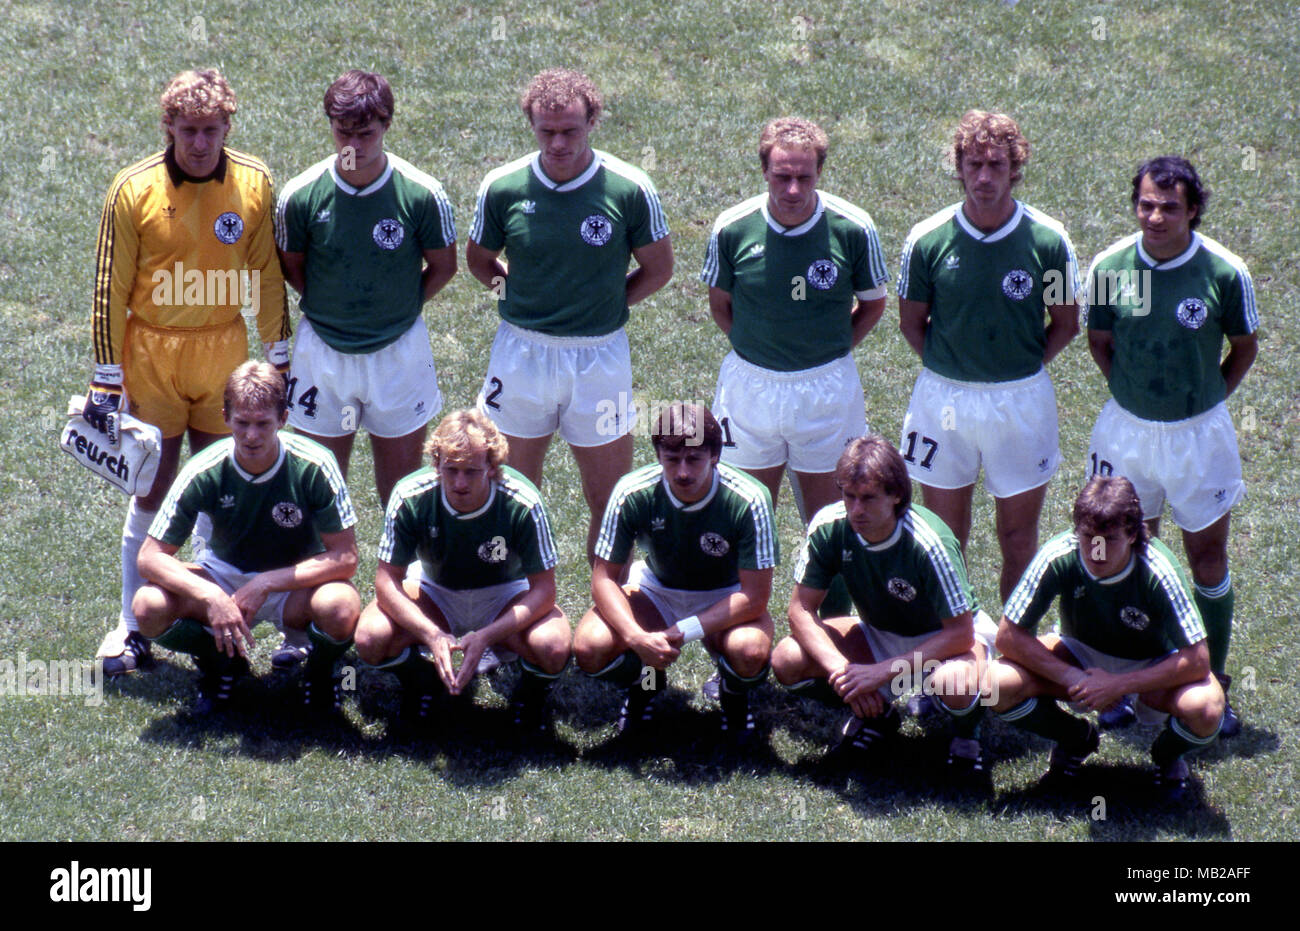 FIFA World Cup - Mexico 1986 29.6.1986, Estadio Azteca, Mexico, D.F. Final Argentina v West Germany. Germany starting line up, back row, left to right: Harald Schumacher, Thomas Berthold, Hans-Peter Briegel, Karl-Heinz Rummenigge, Ditmar Jakobs, Felix Magath. Front, l to r: Karlheinz Fster, Andreas Brehme, Klaus Allofs, Norbert Eder, Lothar Matths. Stock Photo